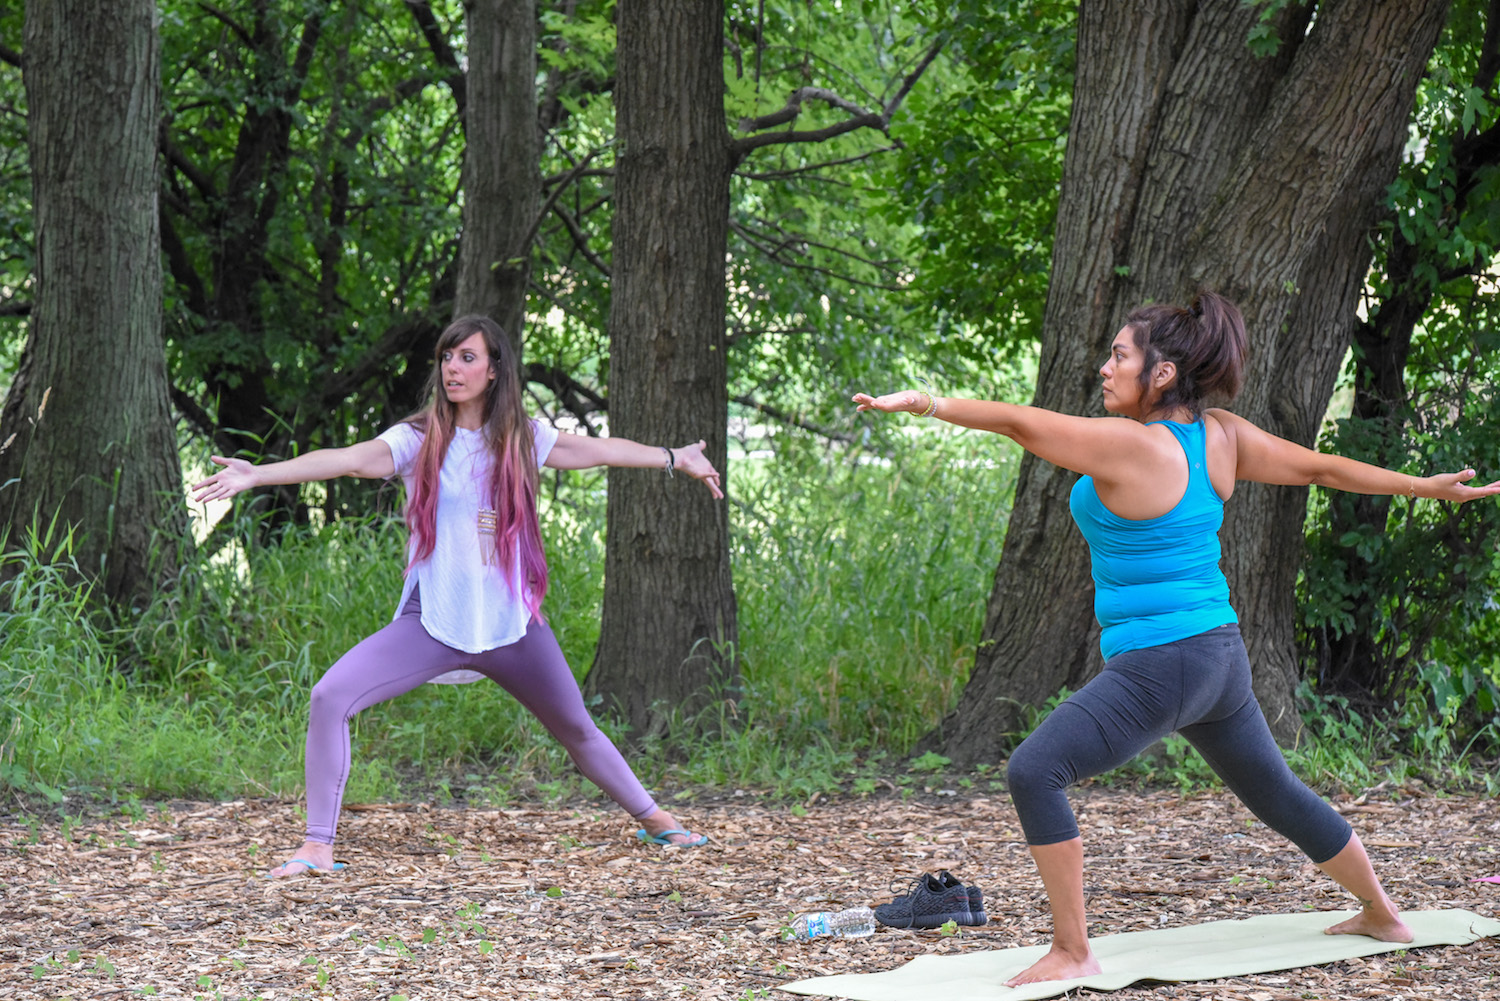 Two people standing in a yoga pose outdoors with trees in the background.